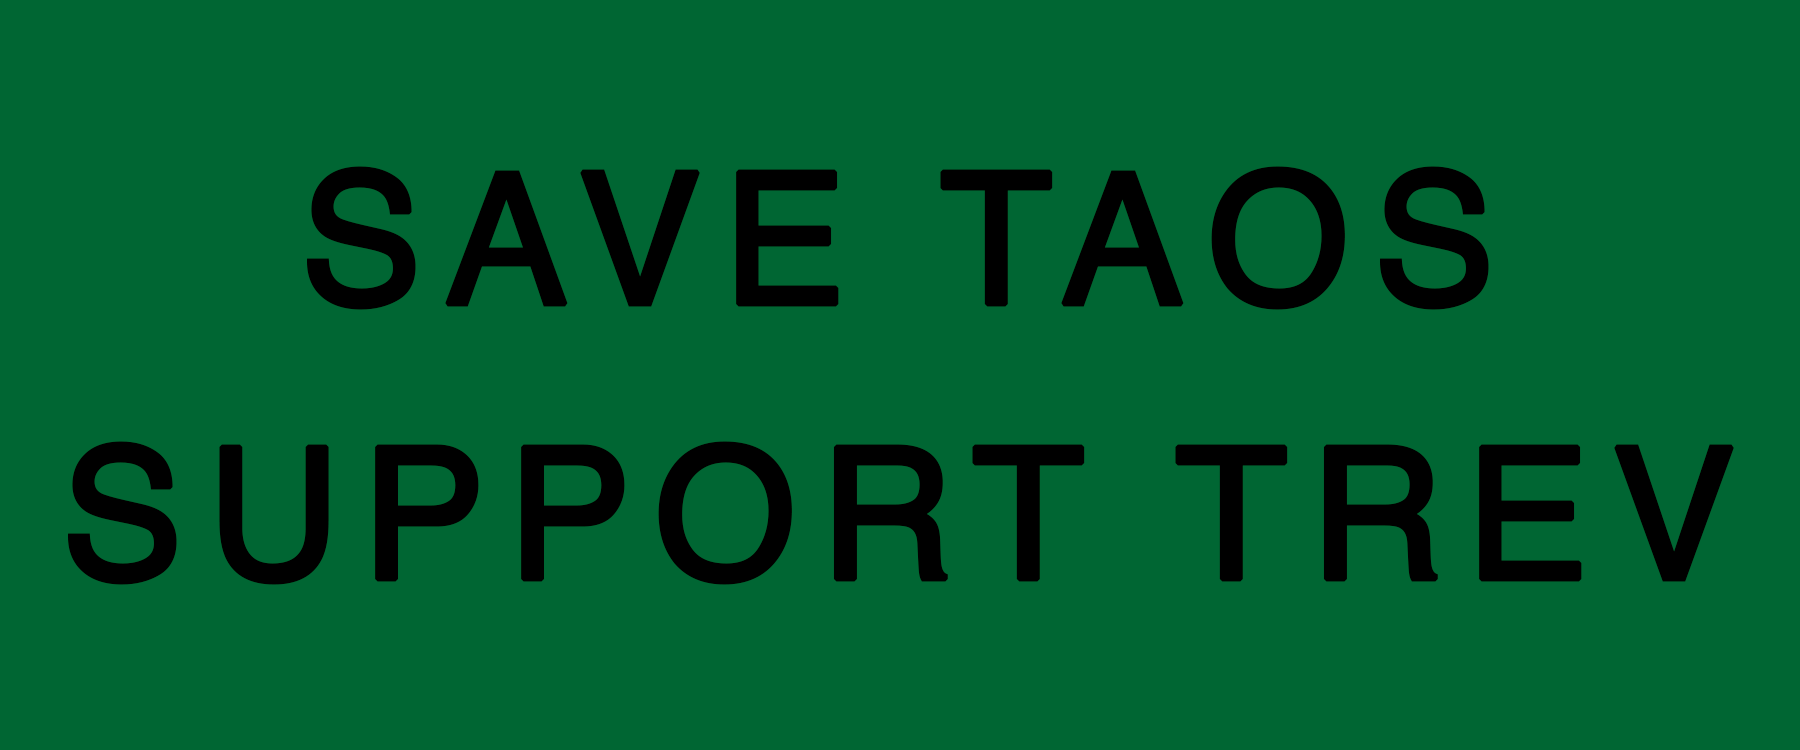 Save Taos Support TREV